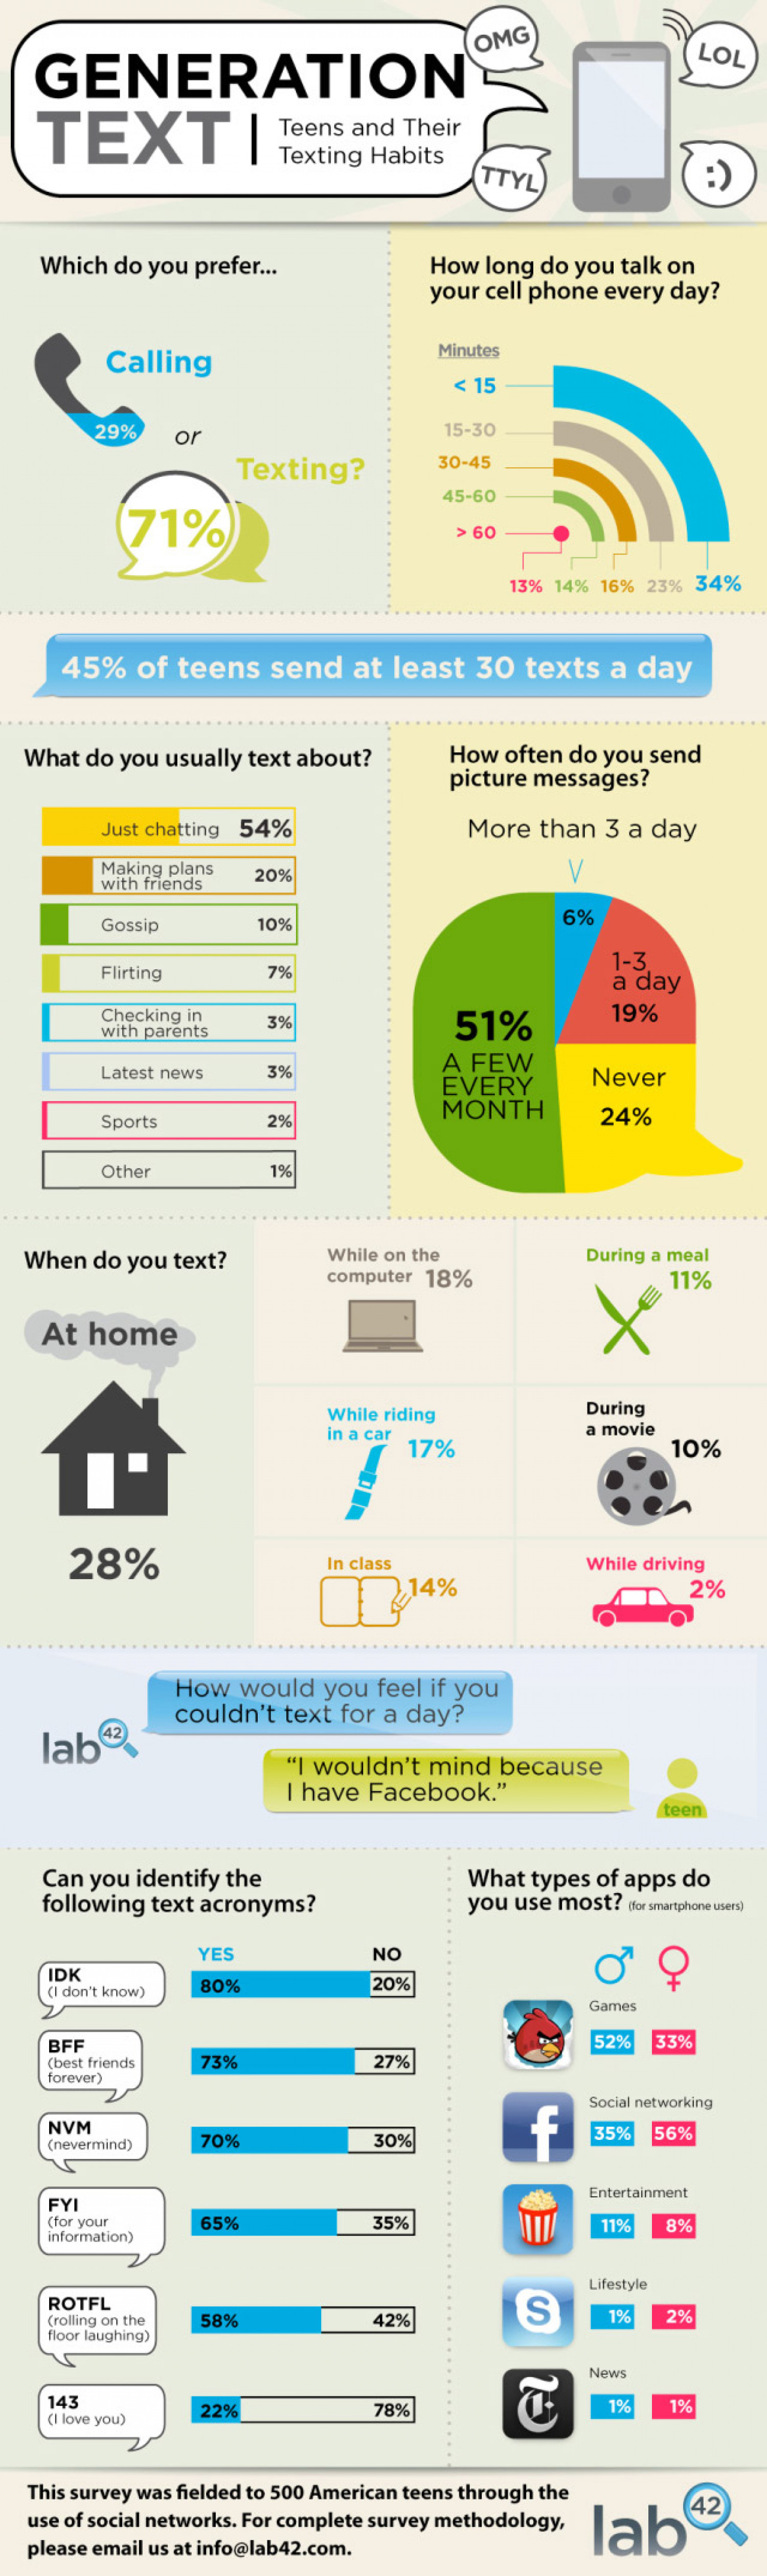 Generation Text Infographic